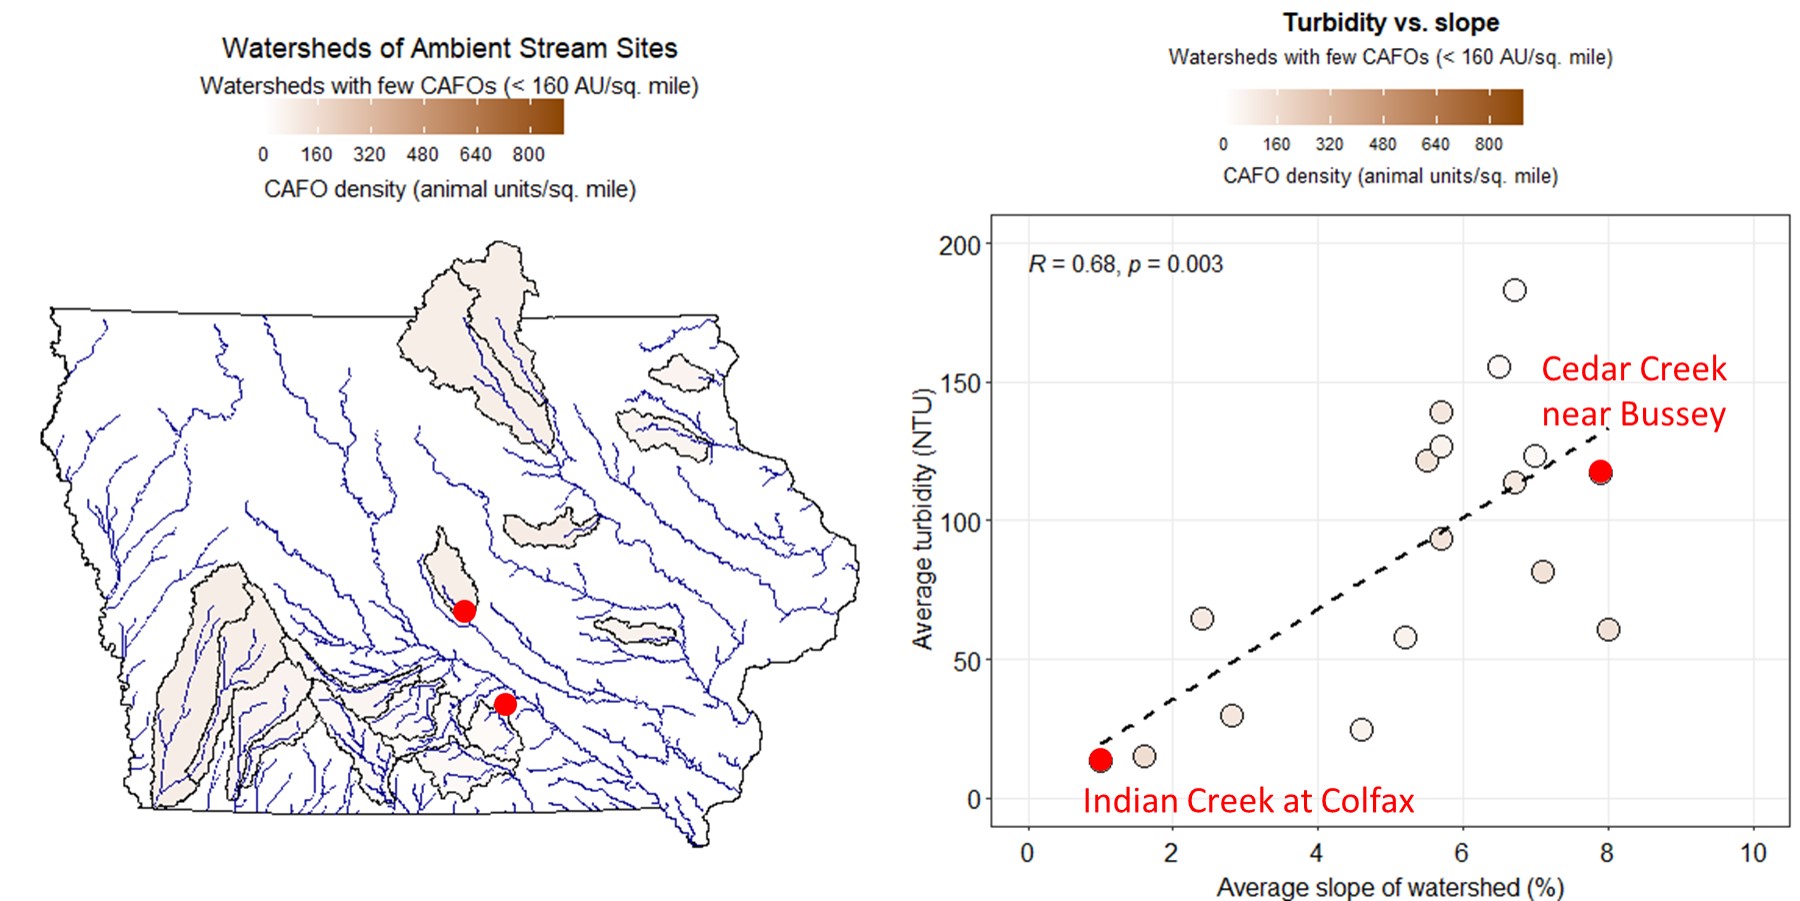 Graph of turbidity vs slope for watersheds with few CAFOs